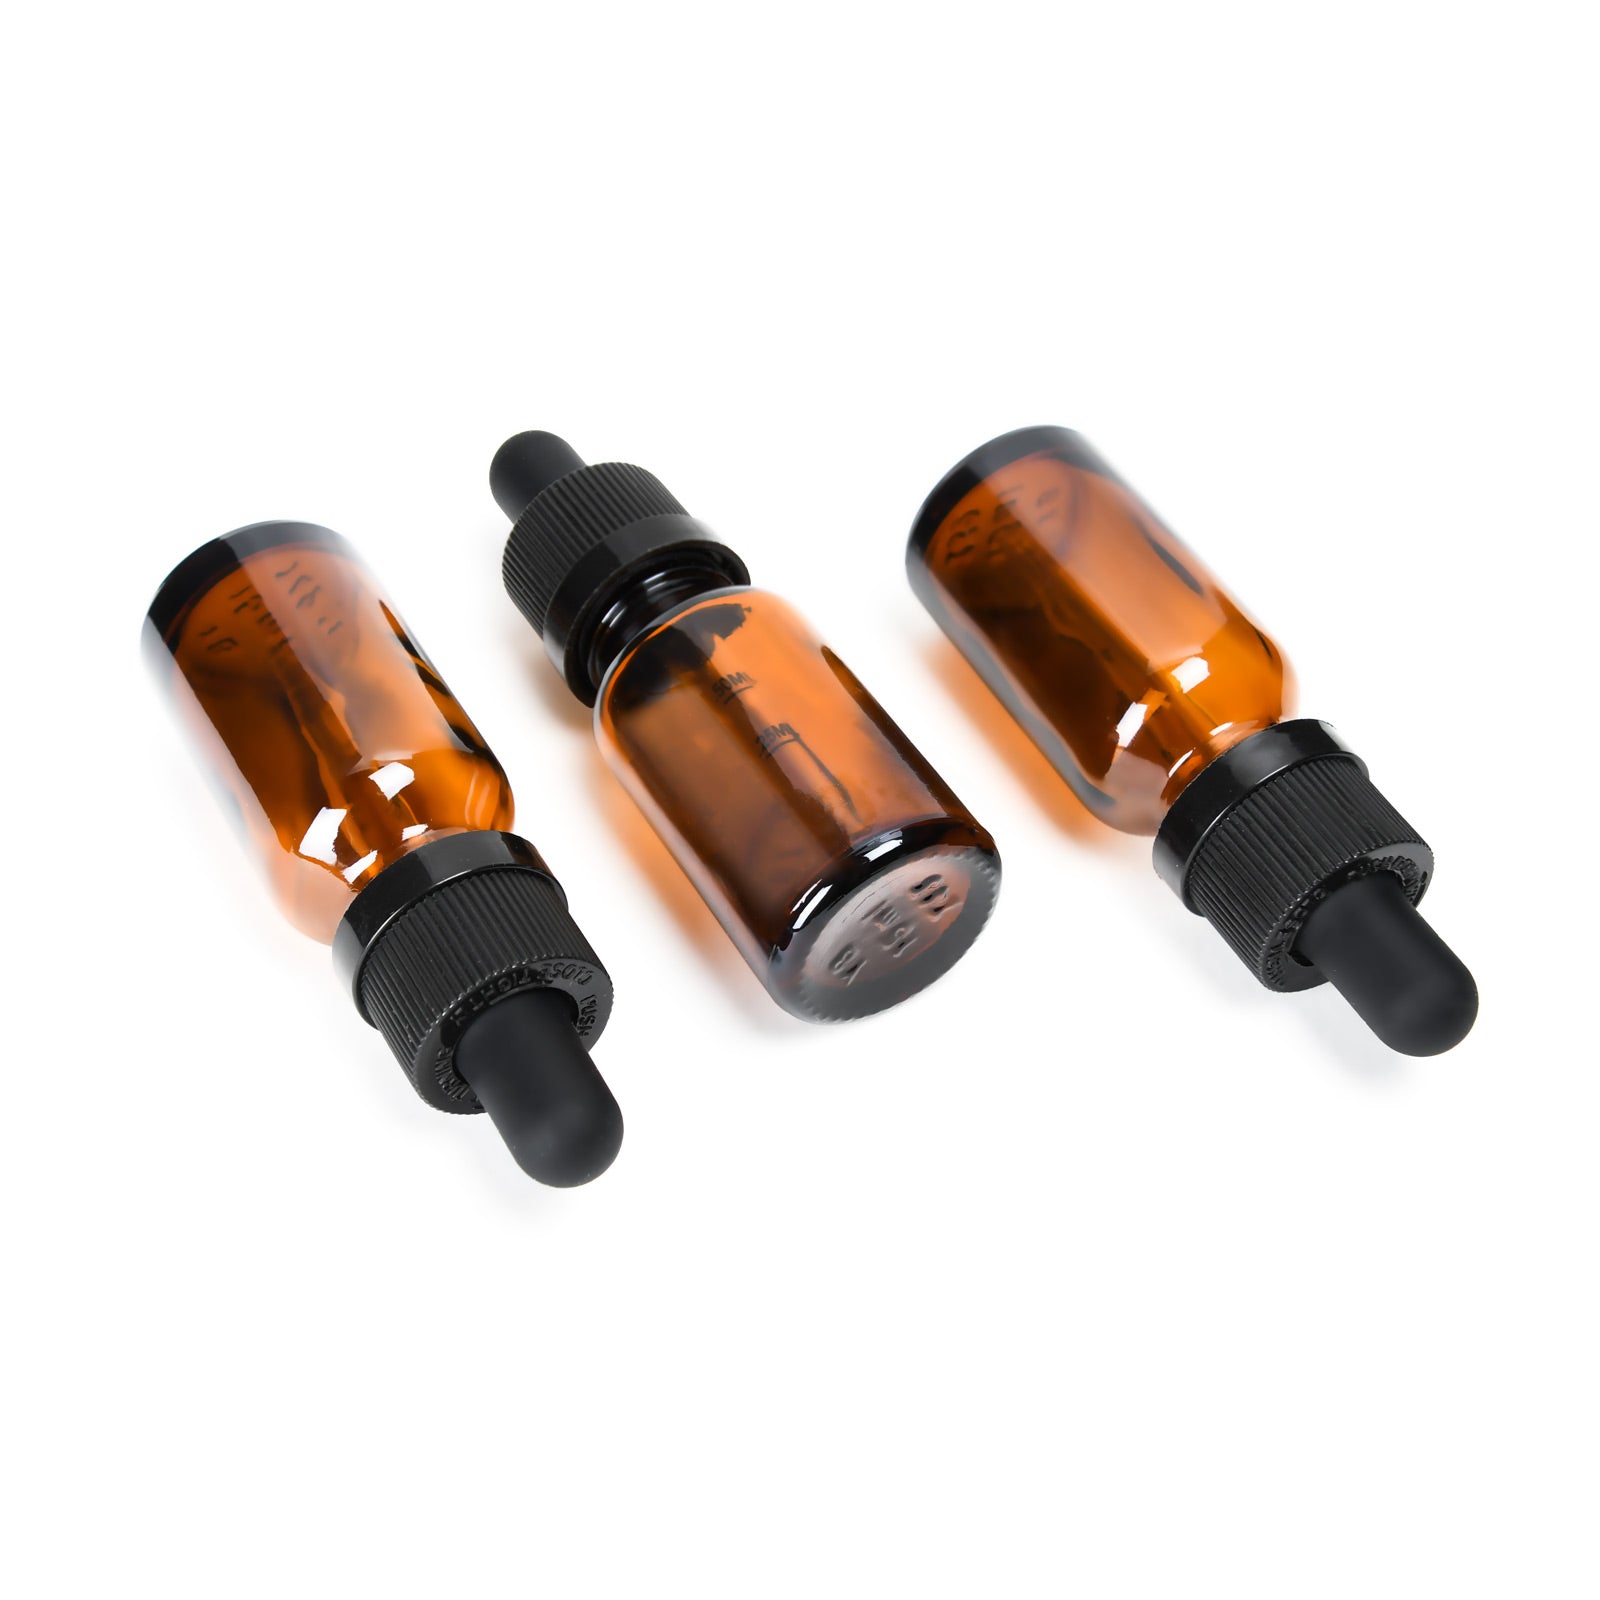 15ml / 0.5oz Glass Tincture Graduated Dropper Bottles - Amber - 156 Count